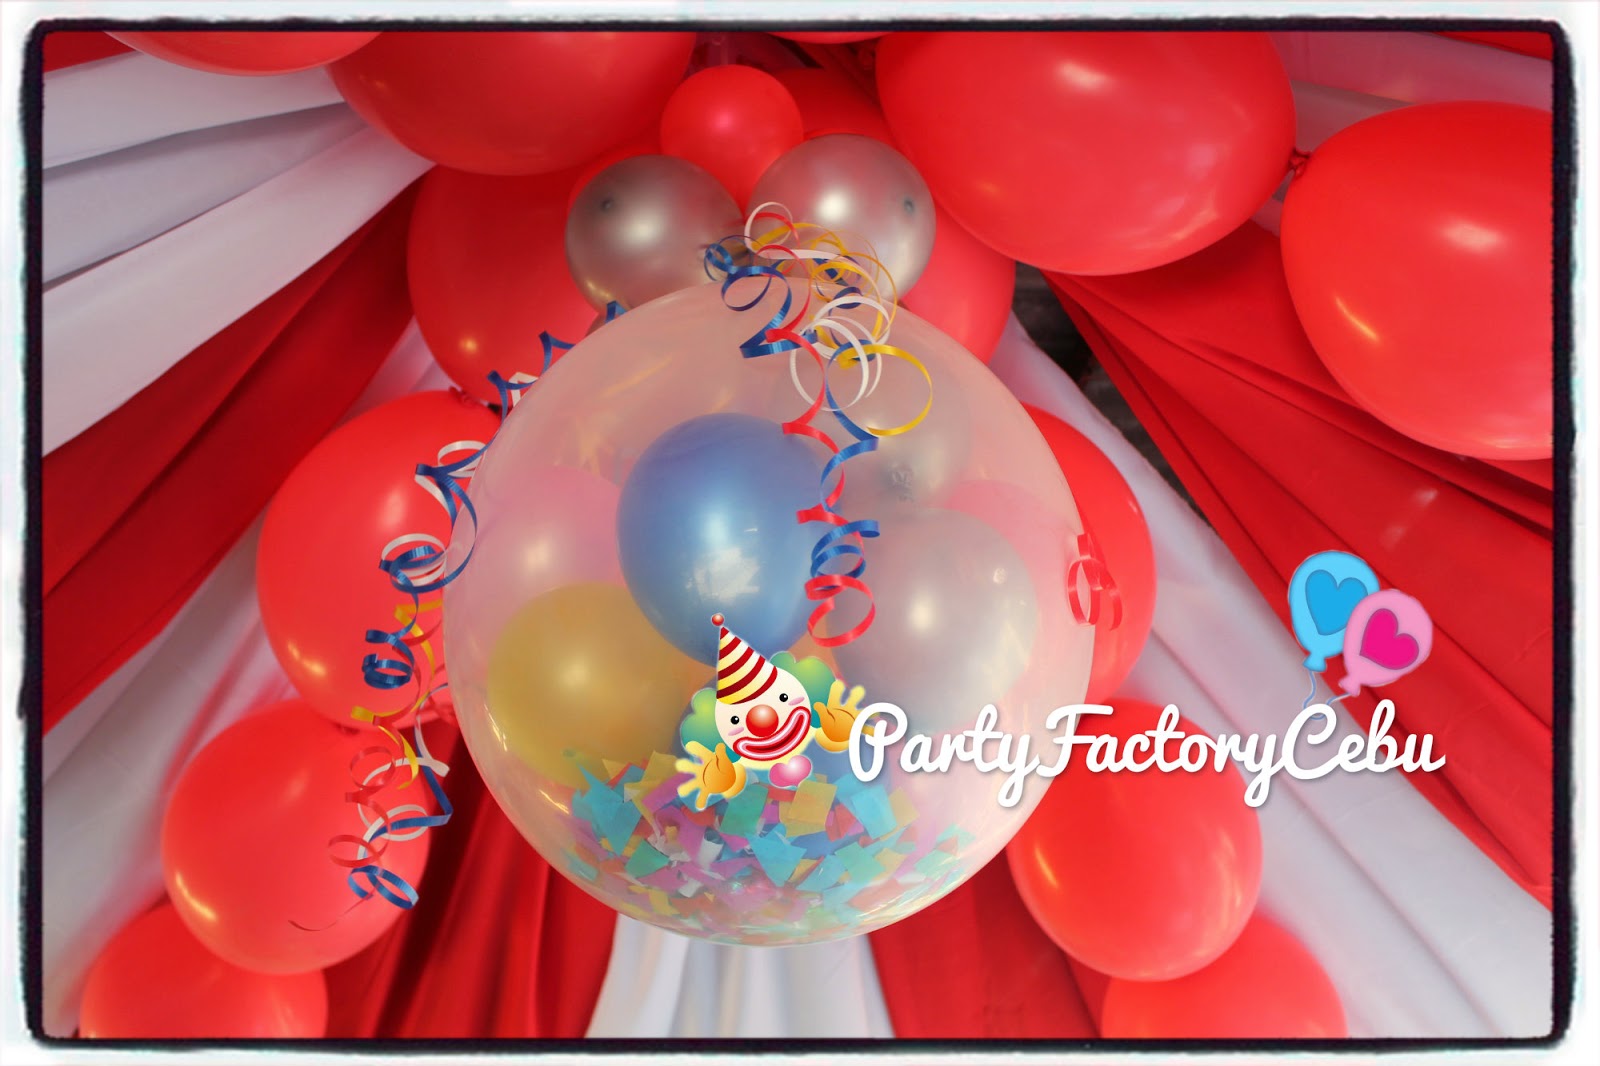 Welcome to PartyFactory Cebu: August 2014